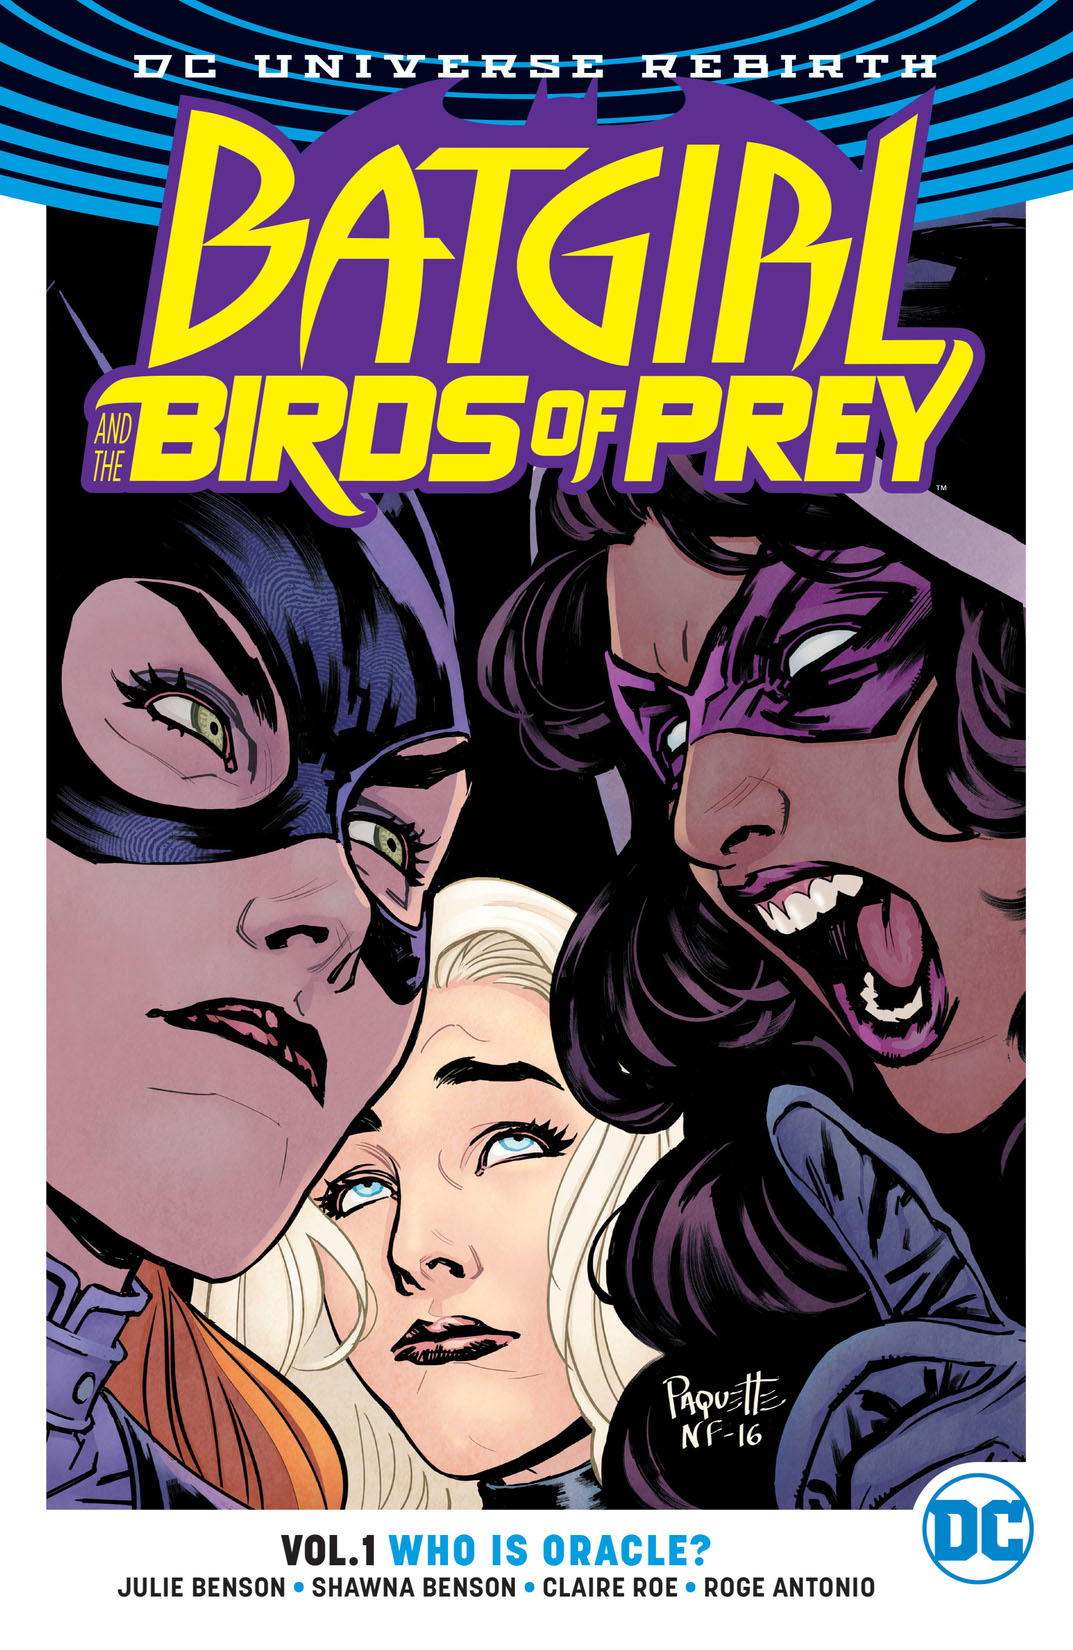 Batgirl and the Birds of Prey Vol. 1: Who is Oracle? preview images